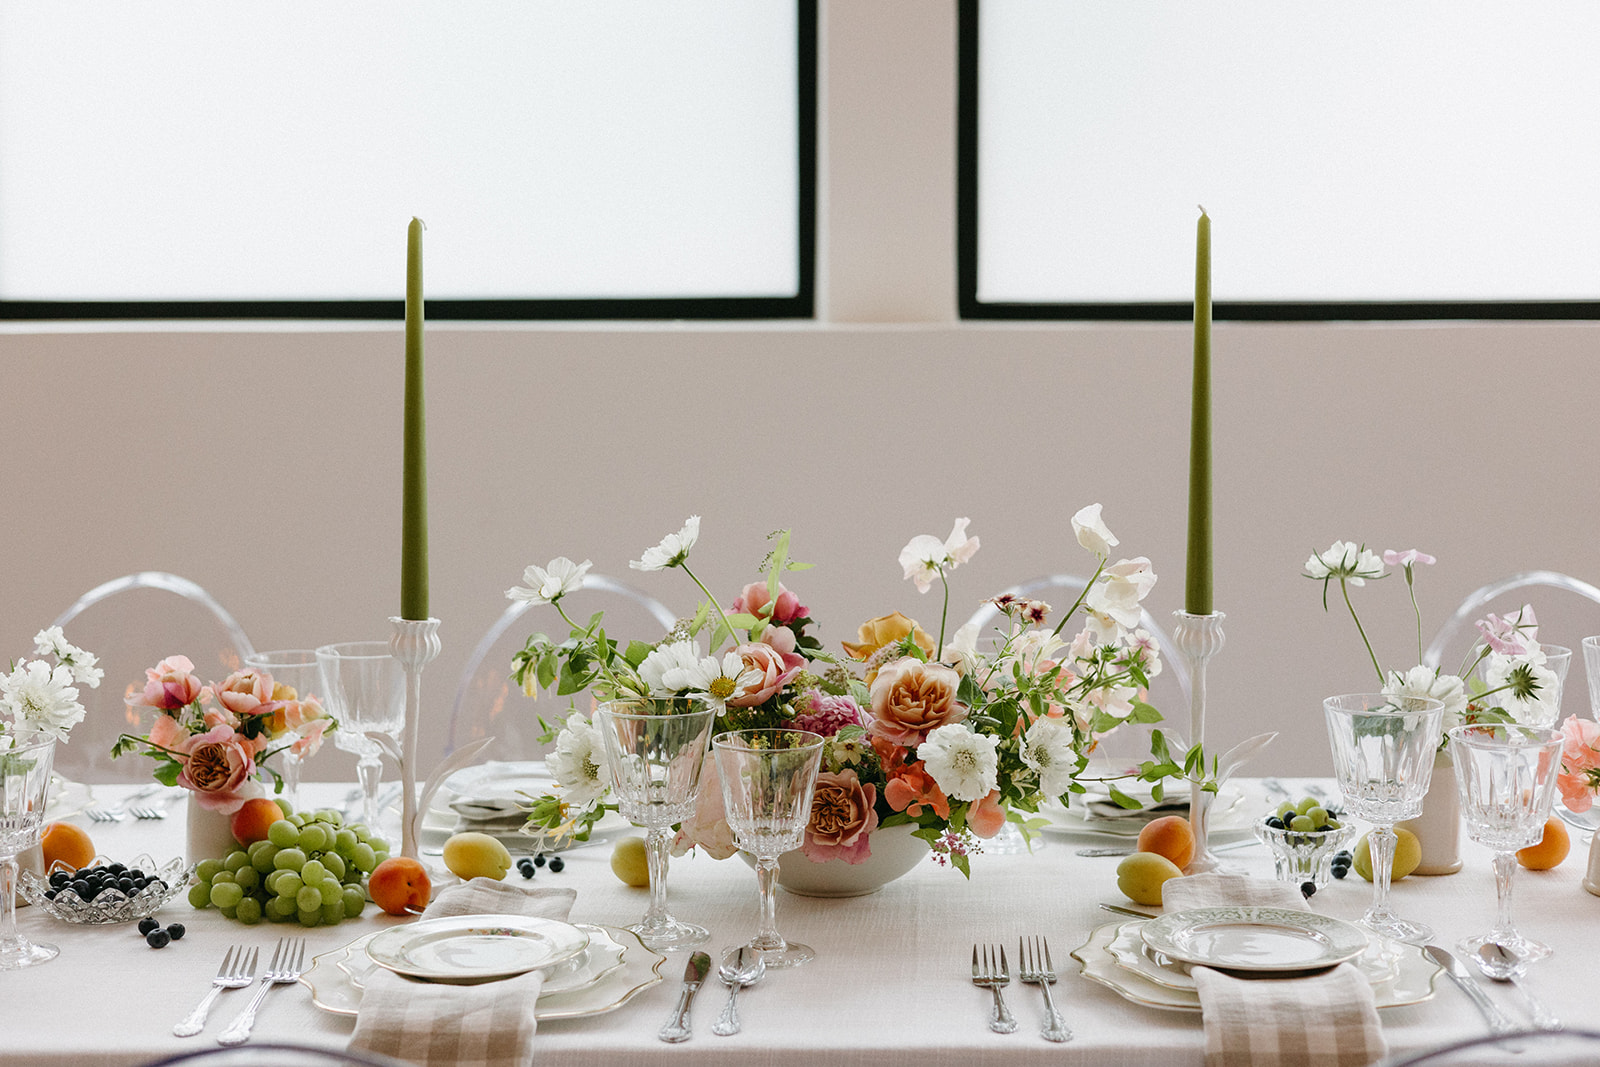 A springtime tablescape with bright florals, green taper candles, vintage plate settings, gingham napkins, and fruit. 